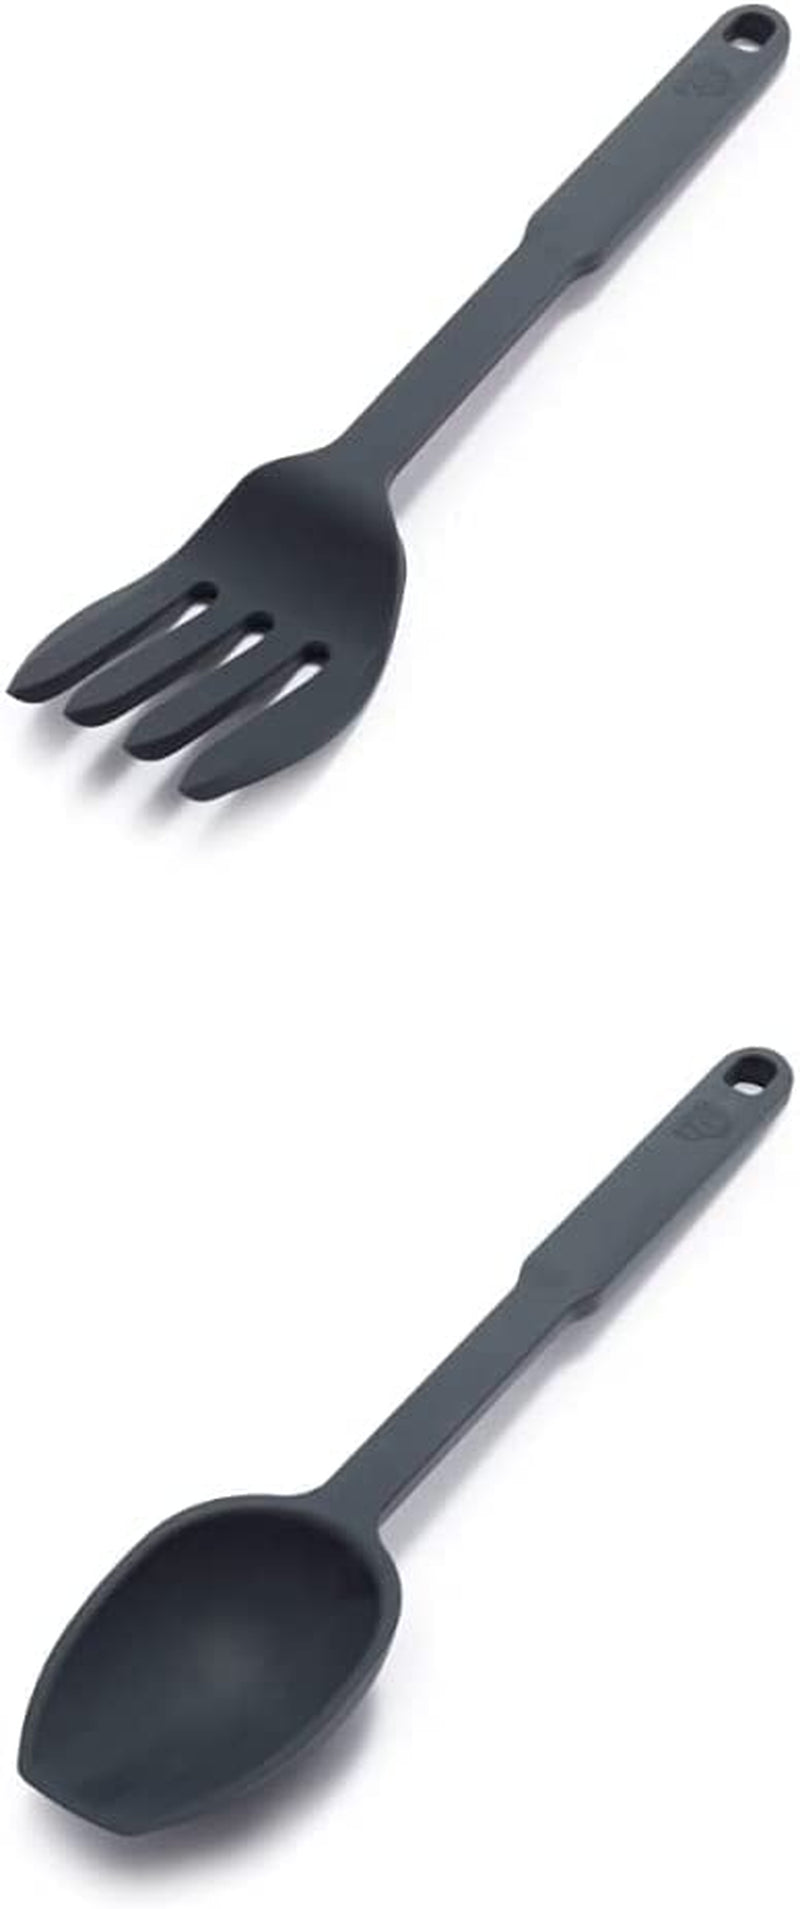 Greenlife Cooking Tools and Utensils, Silicone Spoon for Scooping Scraping and Mixing, Heat and Stain Resistant, Dishwasher Safe, Red Home & Garden > Kitchen & Dining > Kitchen Tools & Utensils GreenLife Gray Fork and Spoon Set 